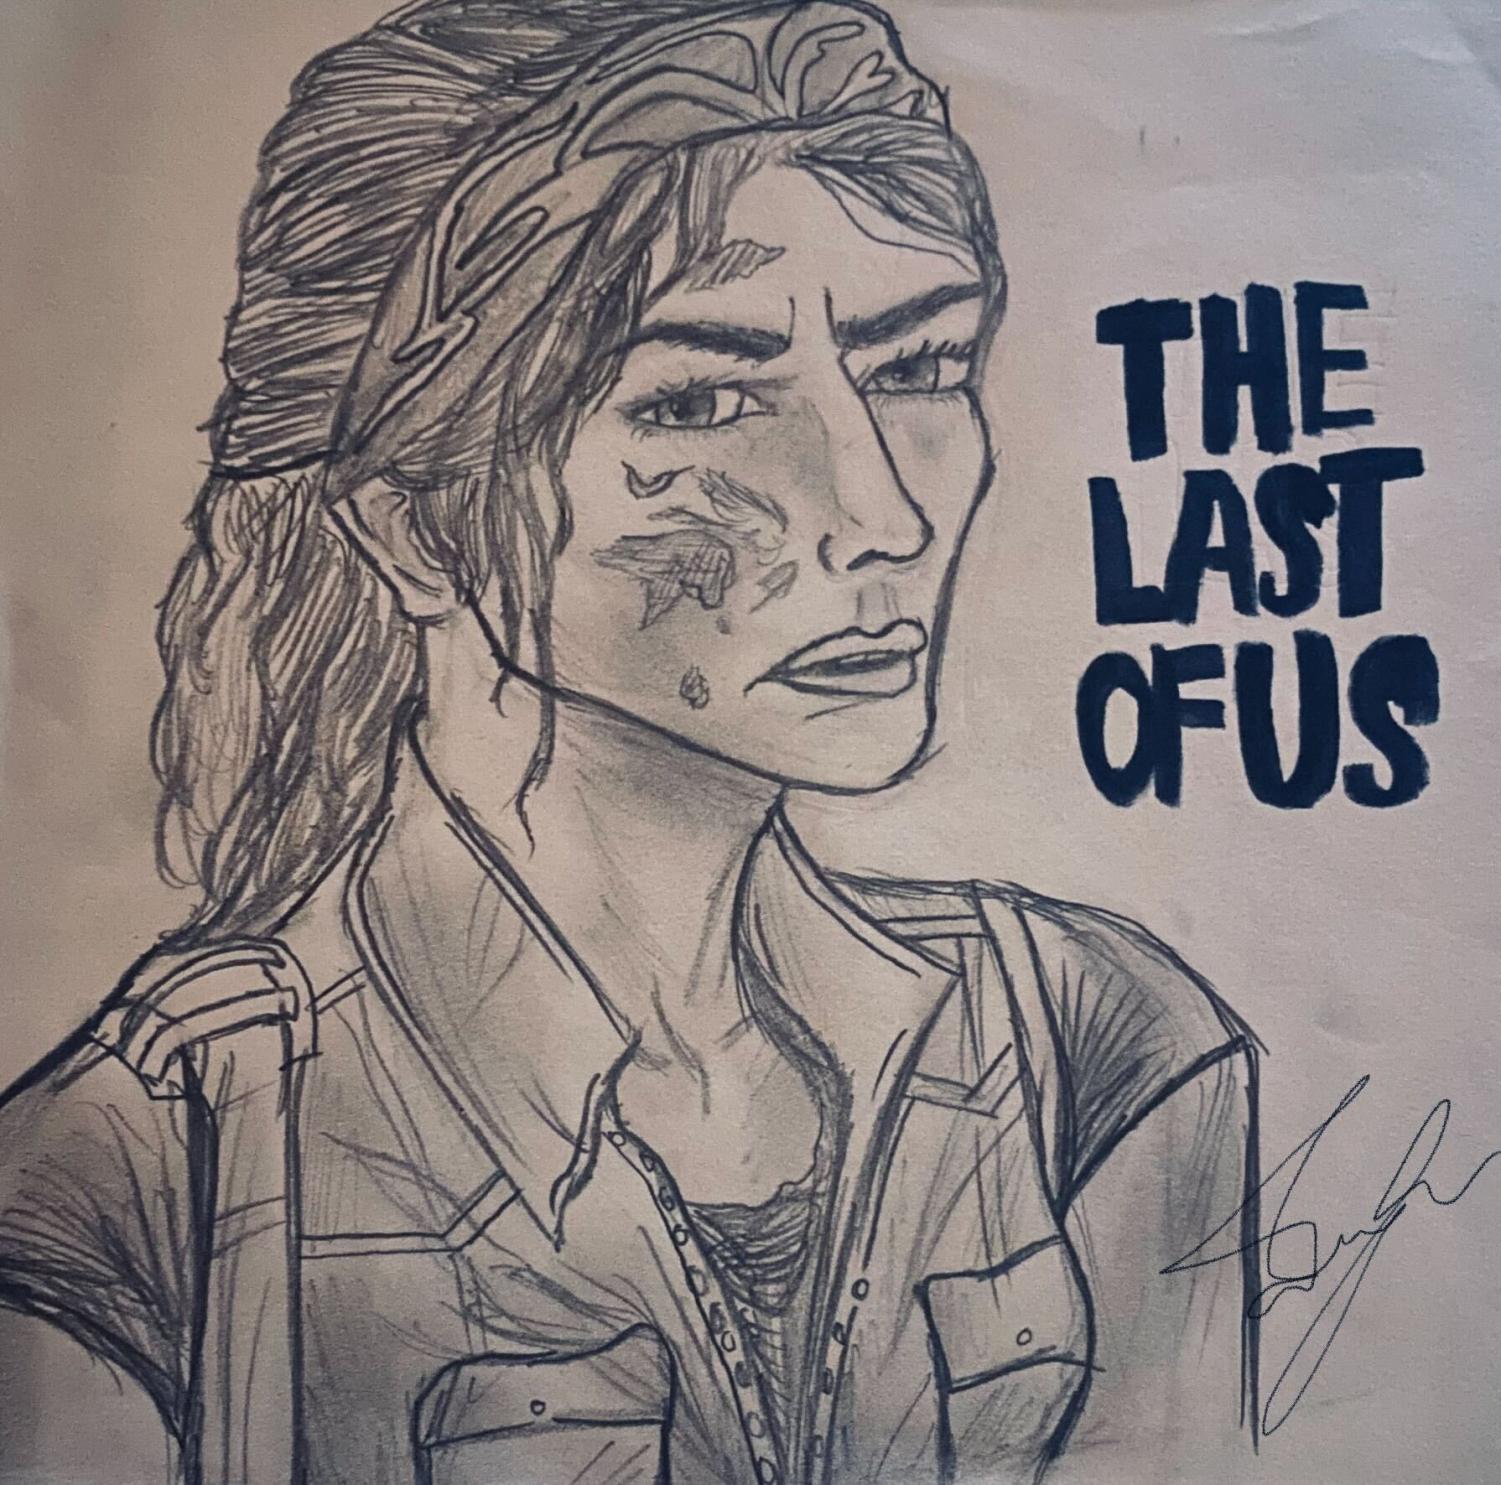 Replying to @noahdraws080 In honor of The Last of Us season finale